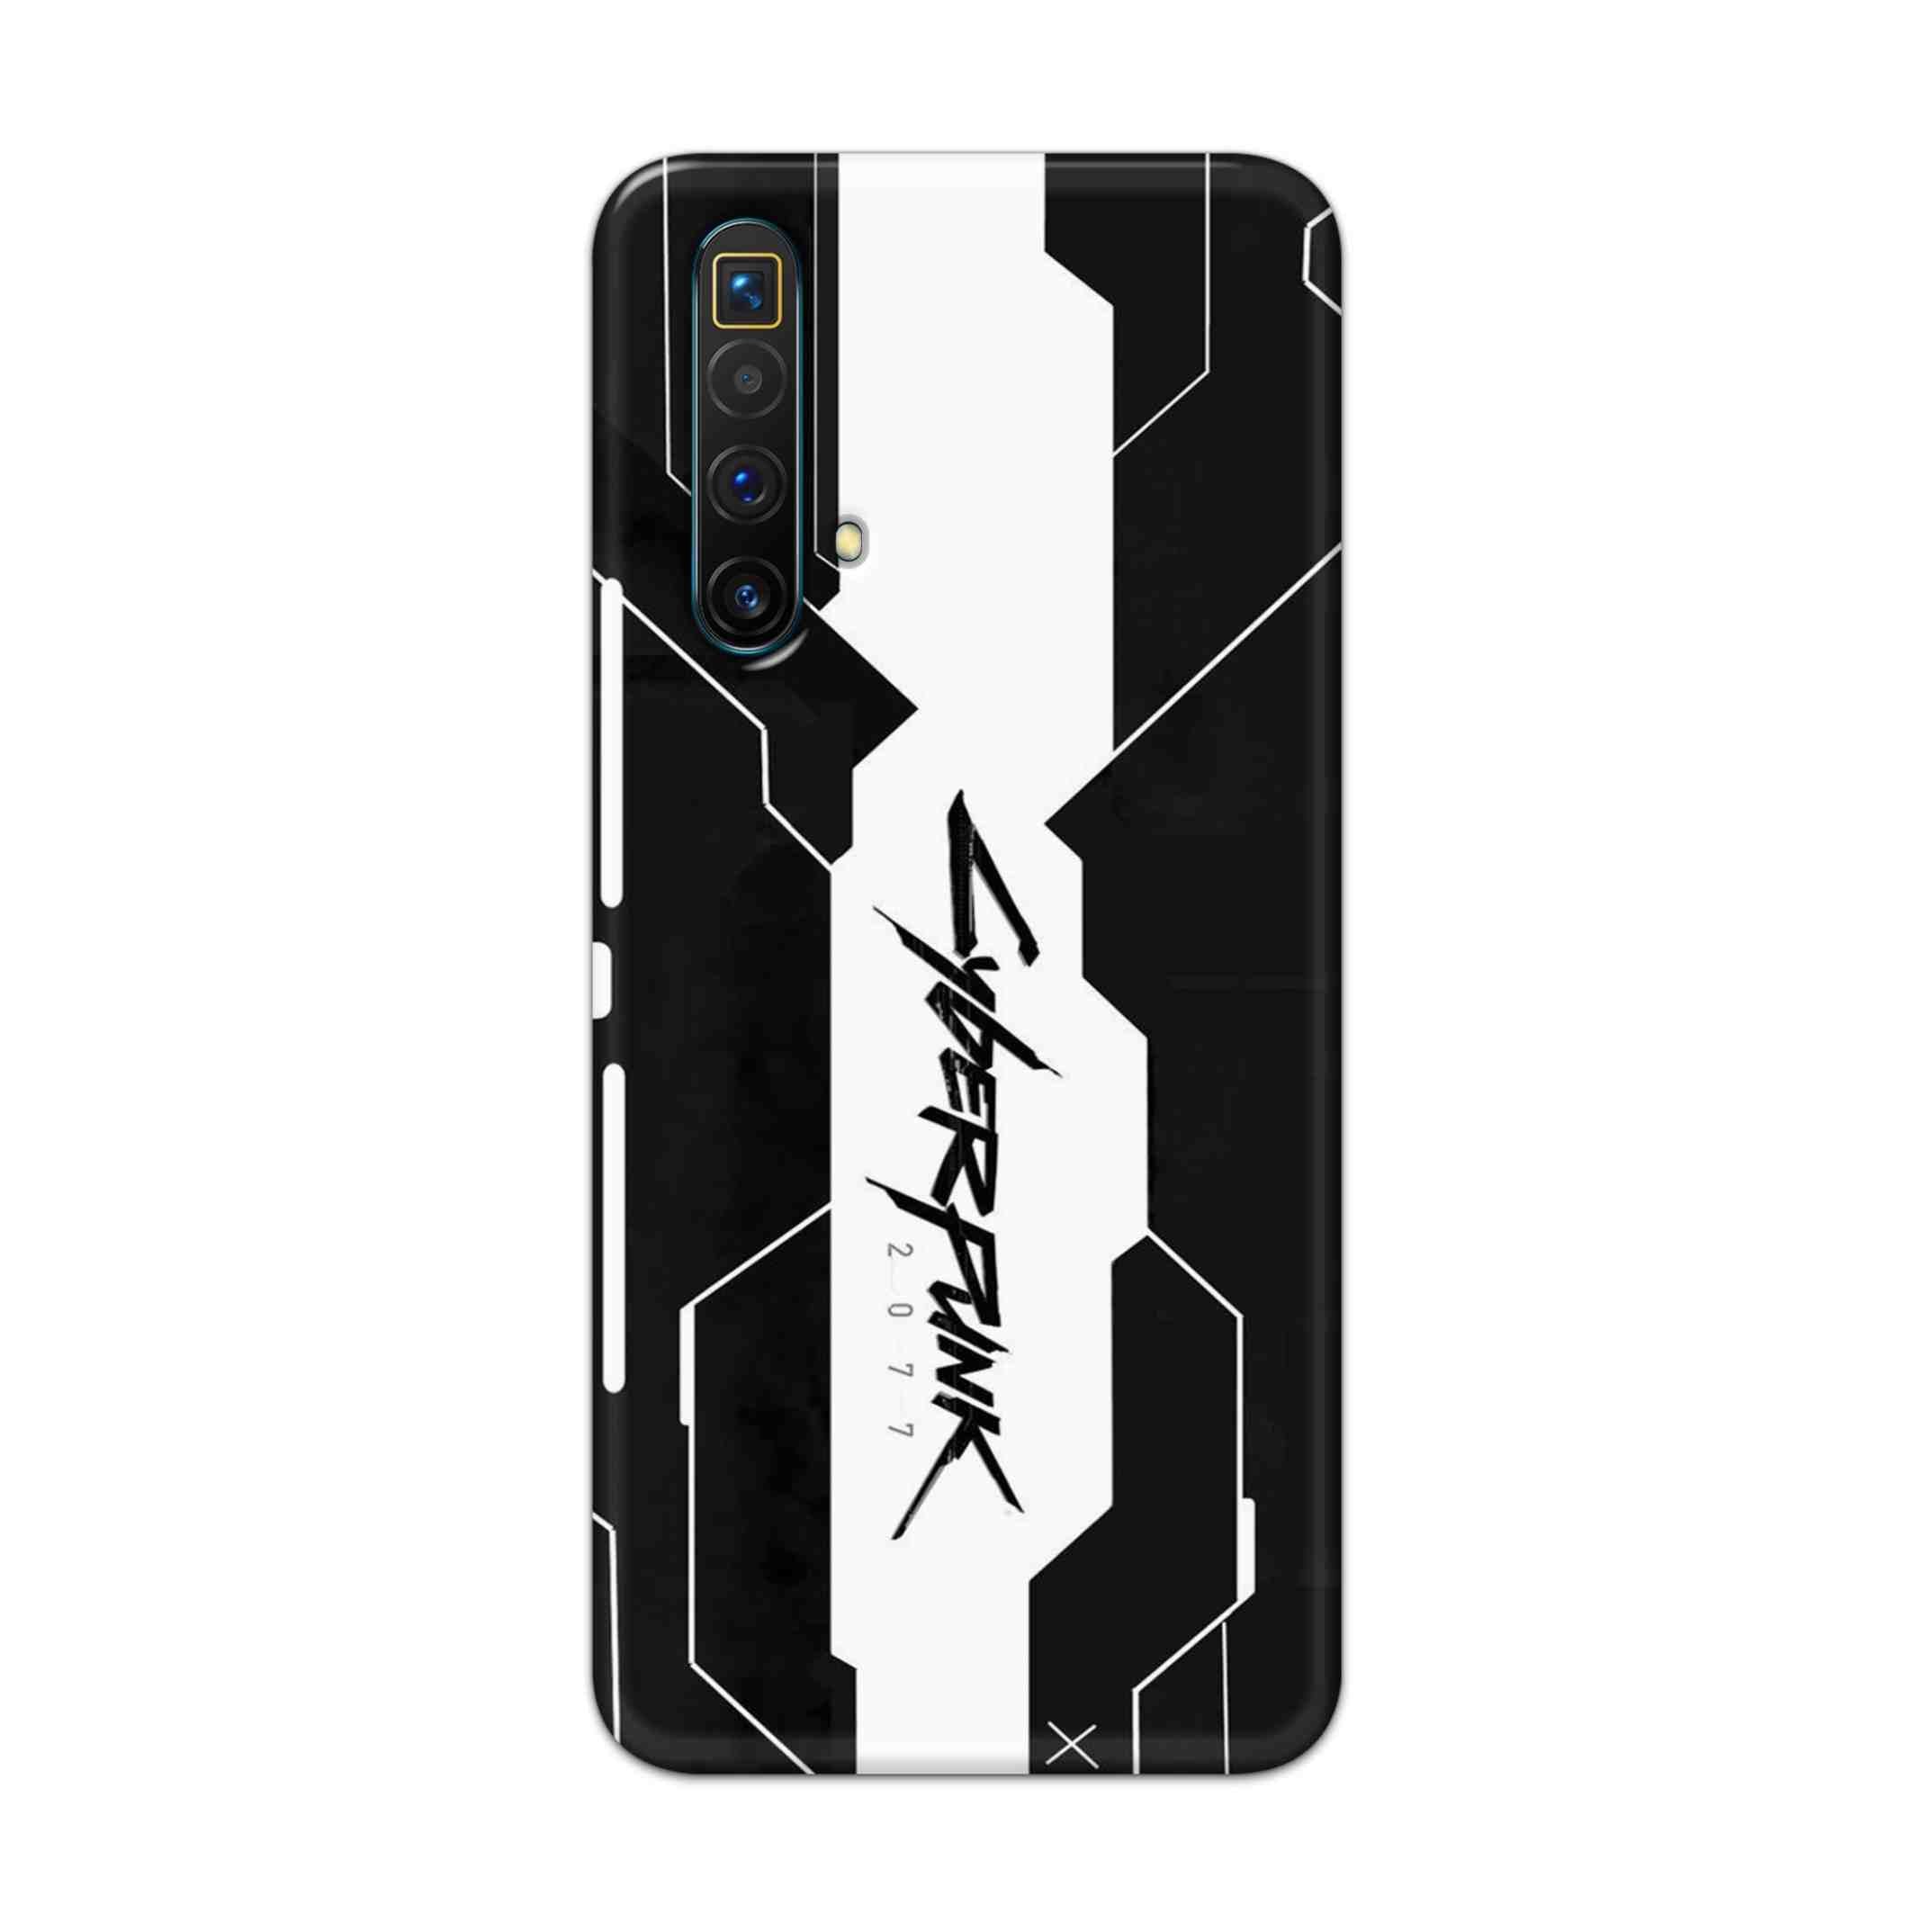 Buy Cyberpunk 2077 Art Hard Back Mobile Phone Case Cover For Realme X3 Superzoom Online